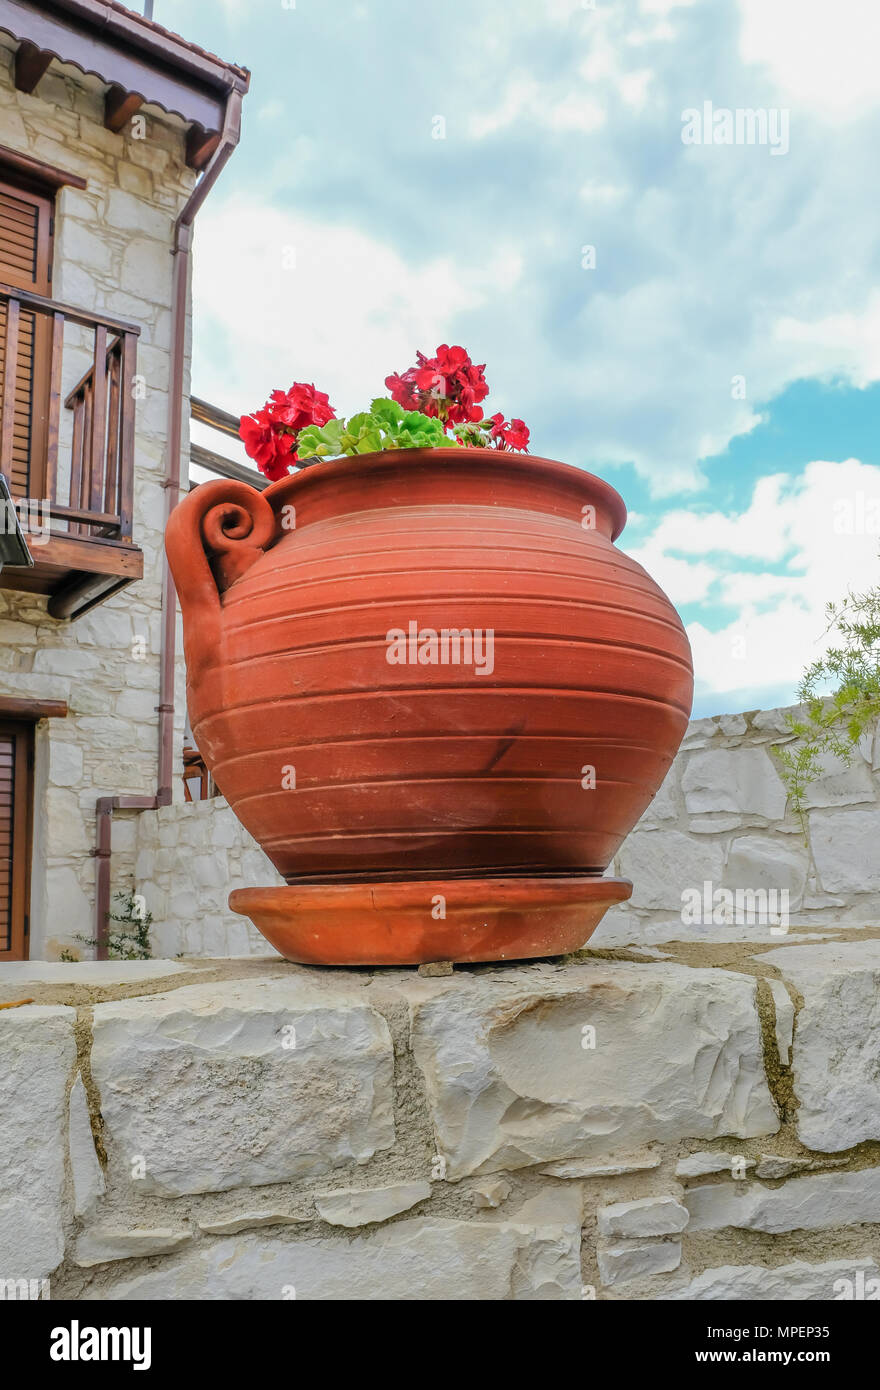 Round terracotta plant pot up on top of a stone wall with a red geranium plant flowering in early summer. Stock Photo